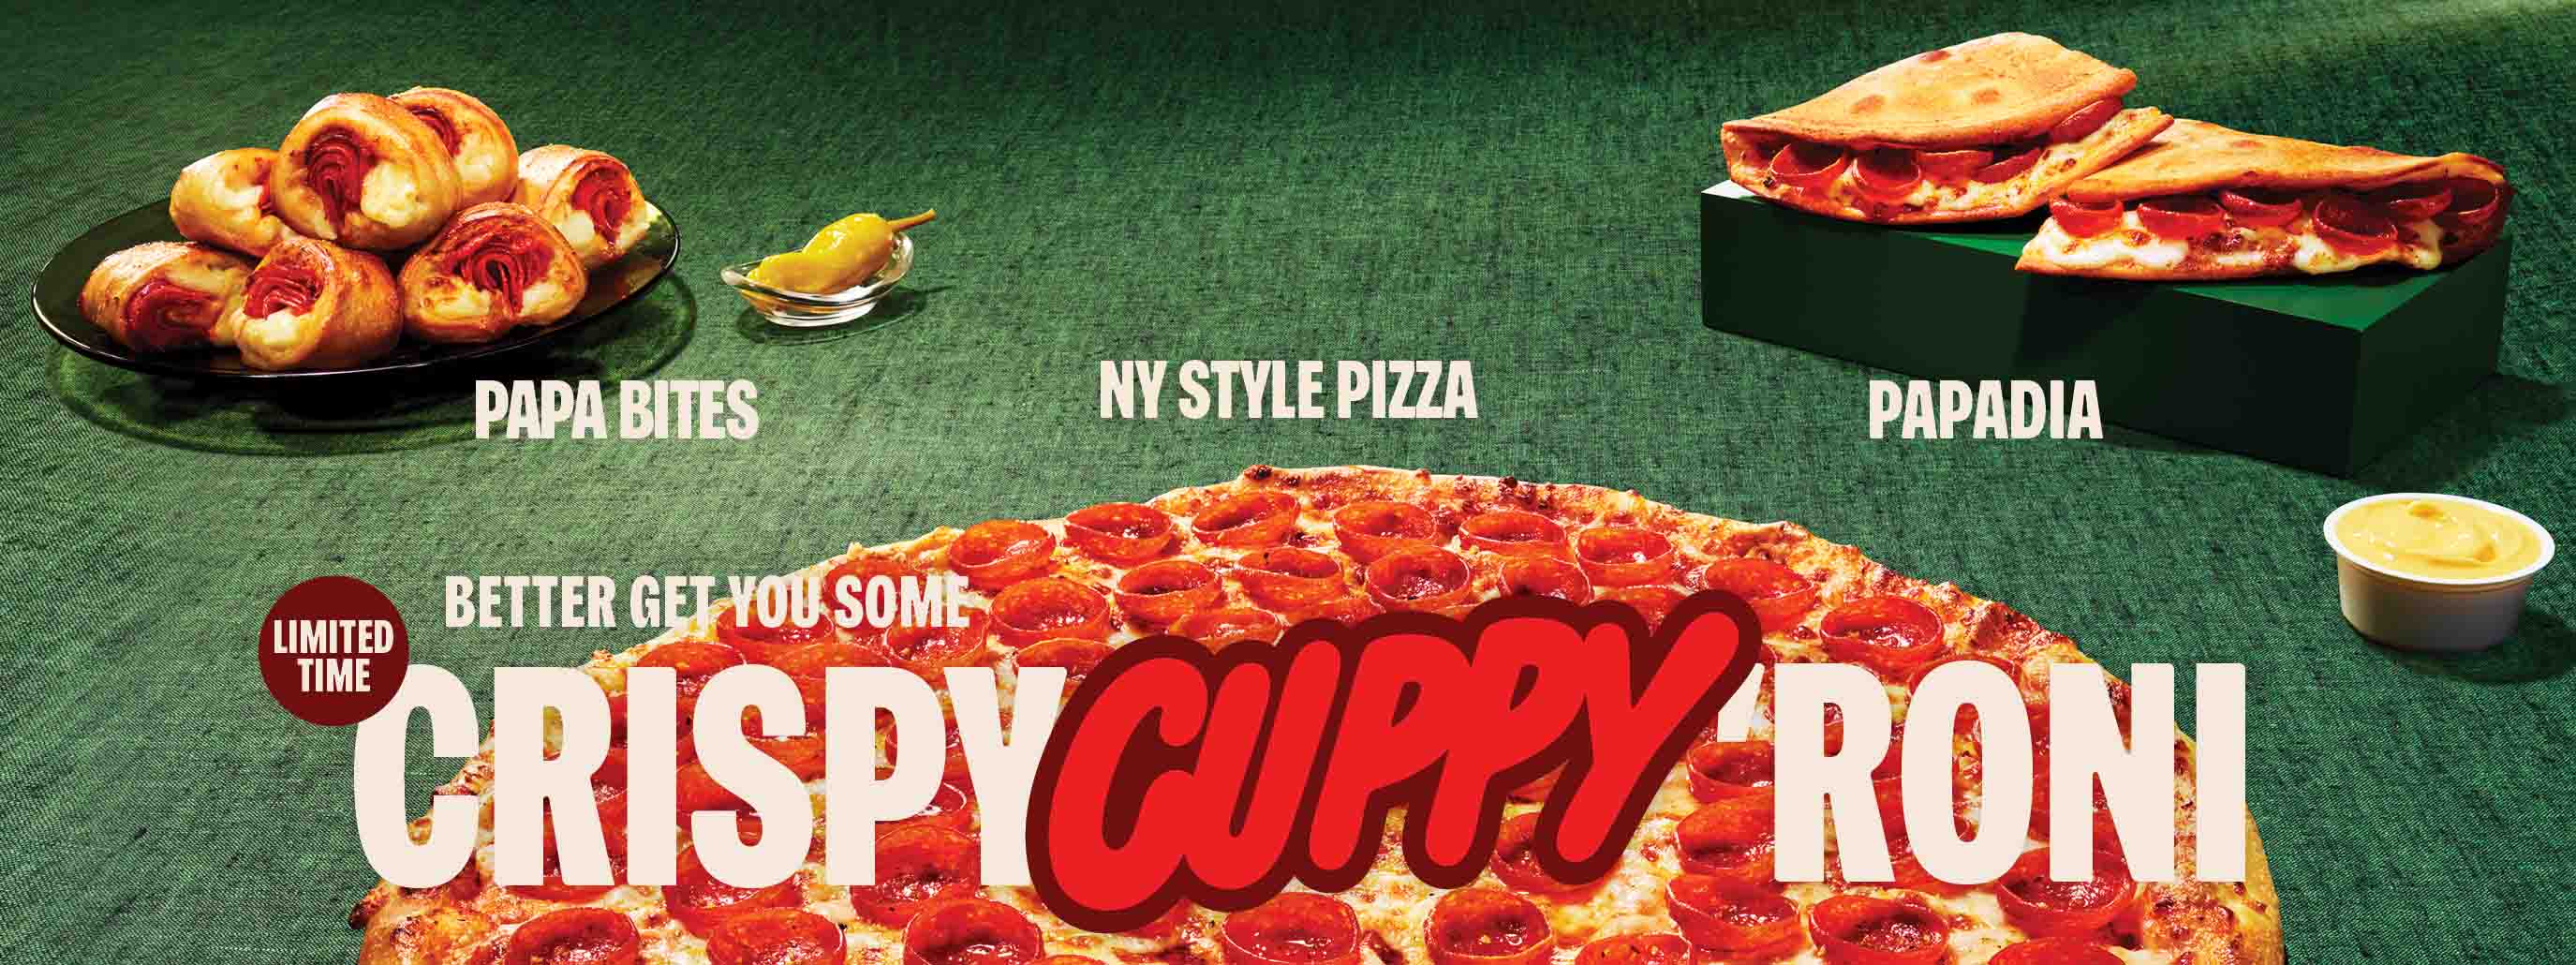 New York style crispy cuppy roni, limited time only